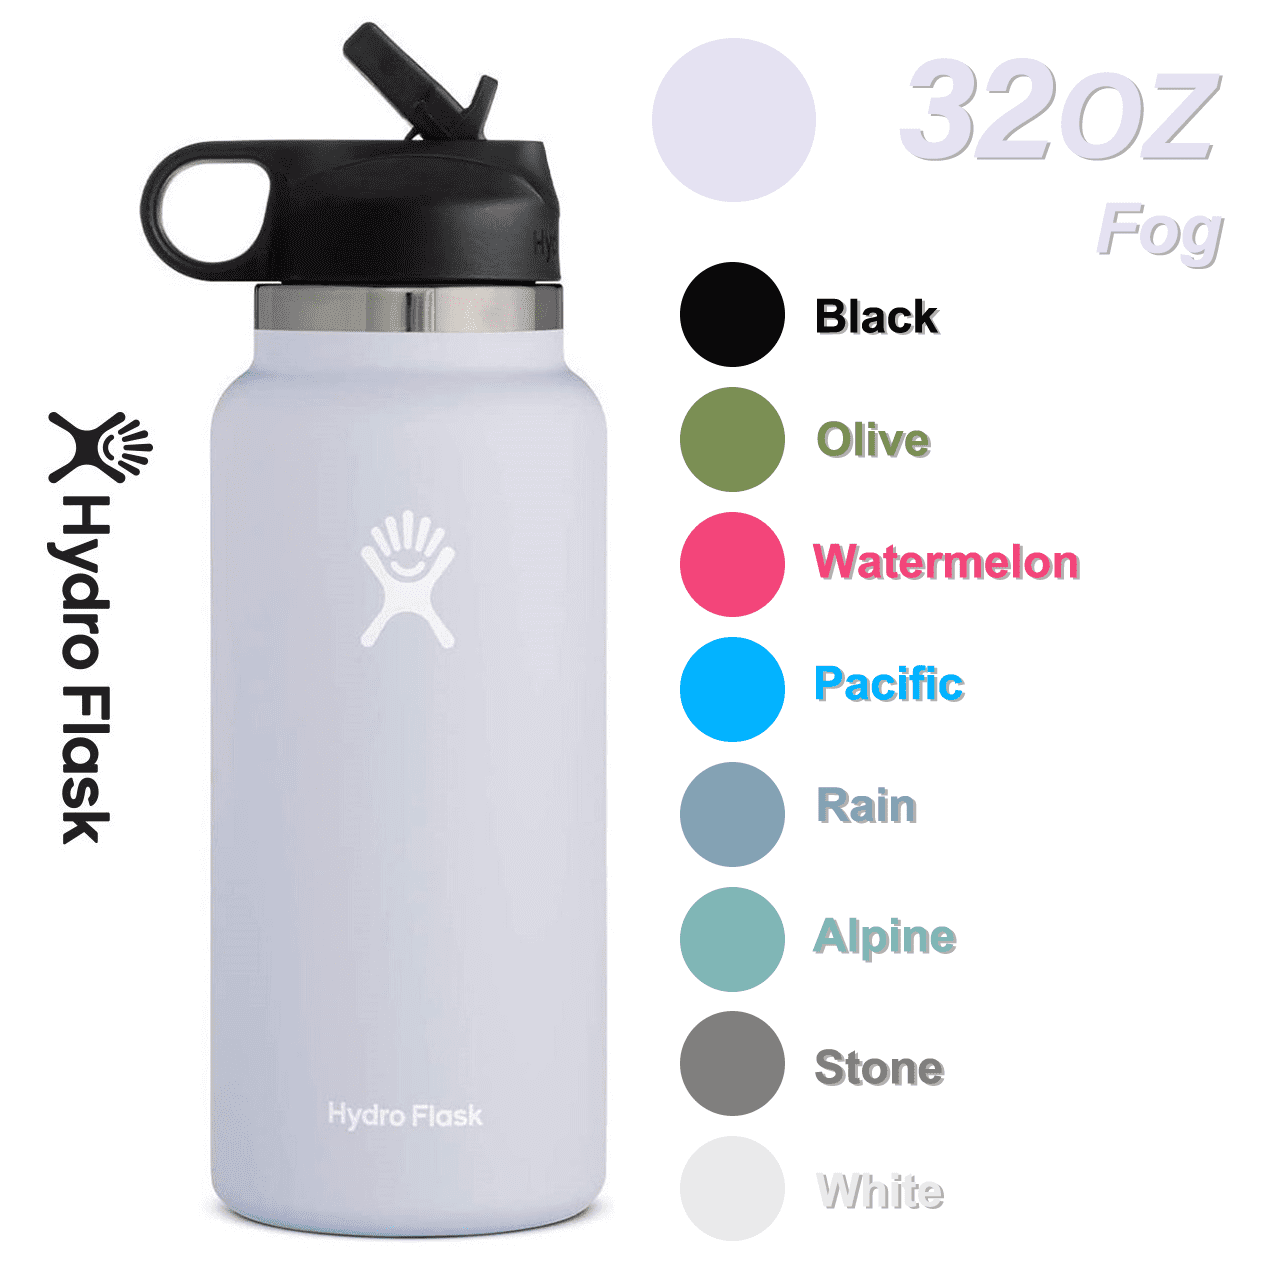 Hydro Flask Hot Hydro Flask Wide Mouth Stainless Steel Water Bottle With Cap Multi color 